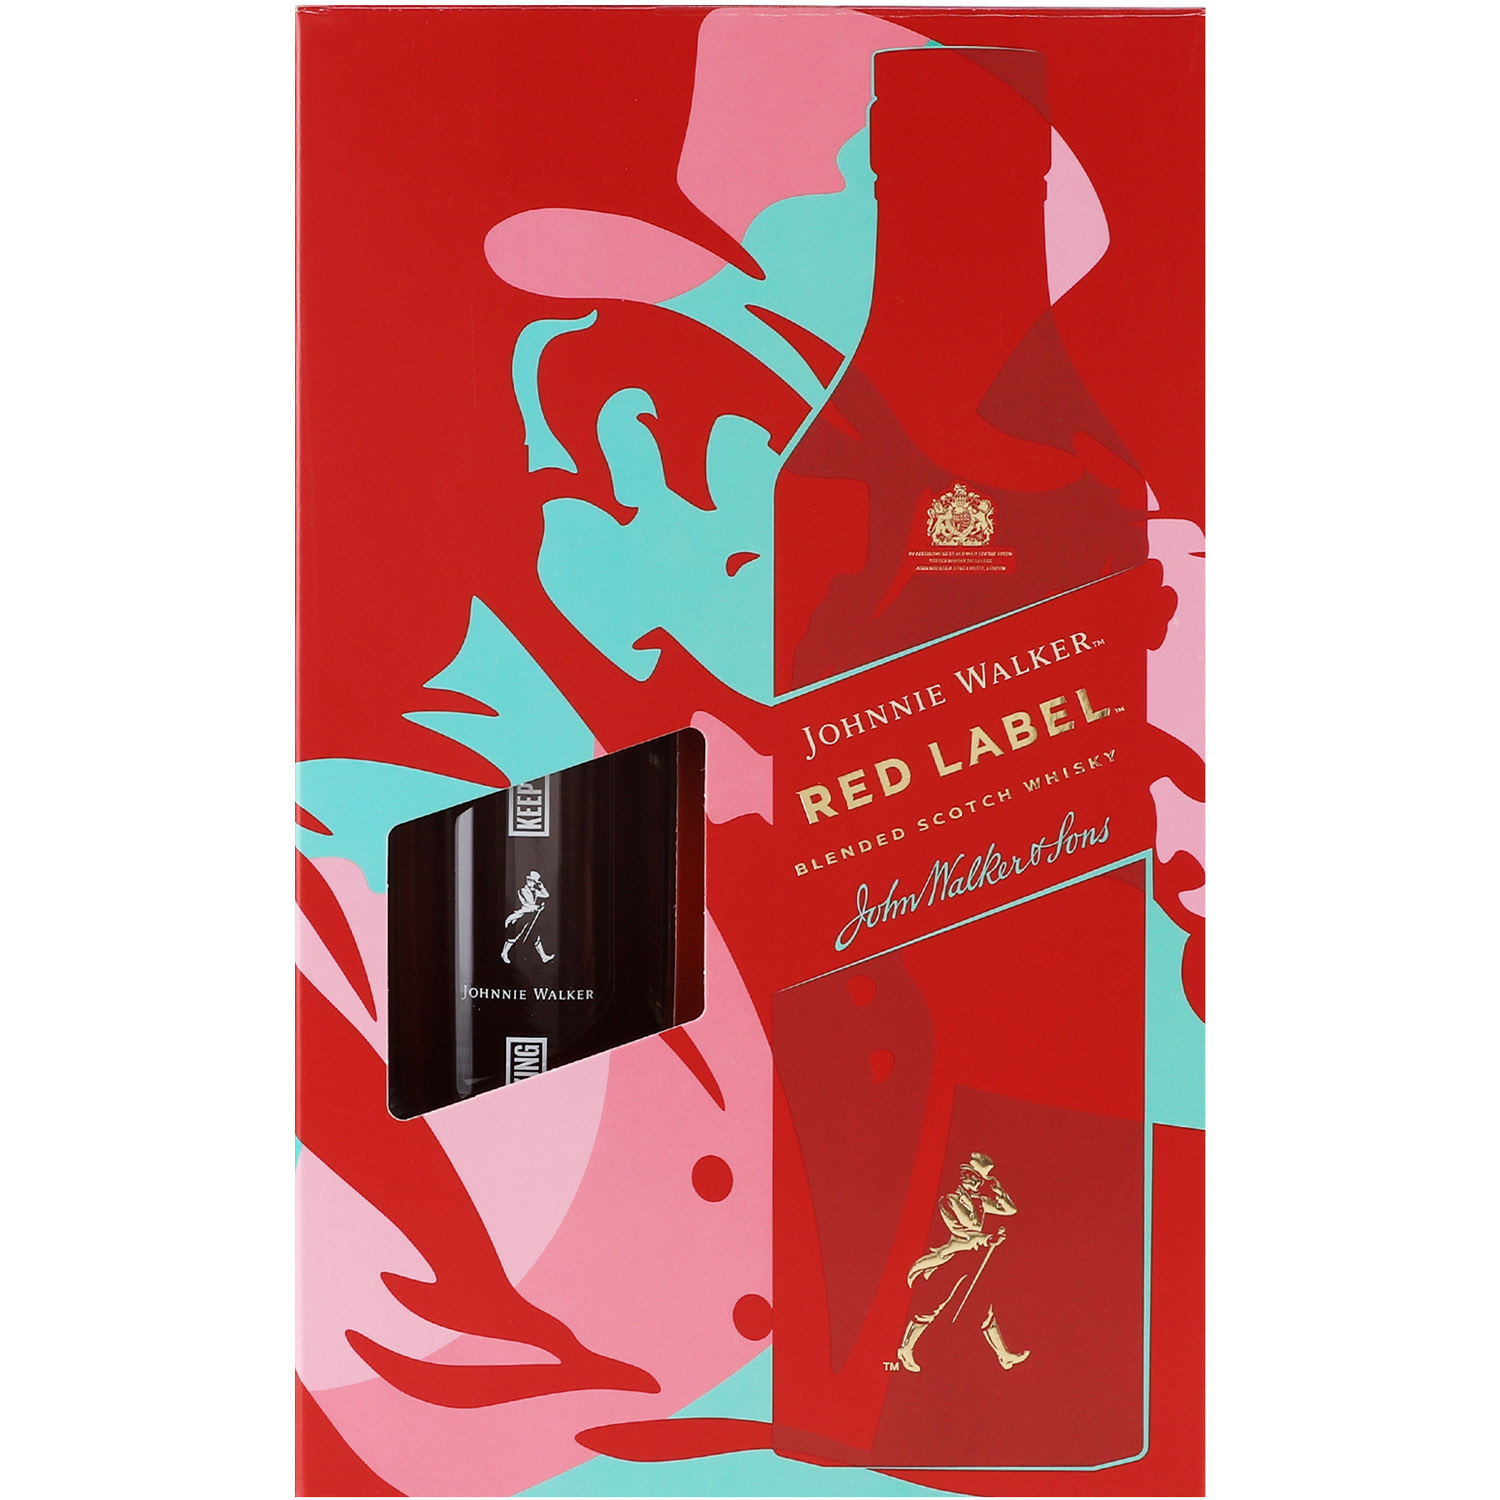 Набор: виски Johnnie Walker Red label Blended Scotch Whisky 40%, 0,7 л + 2 бокала - фото 1